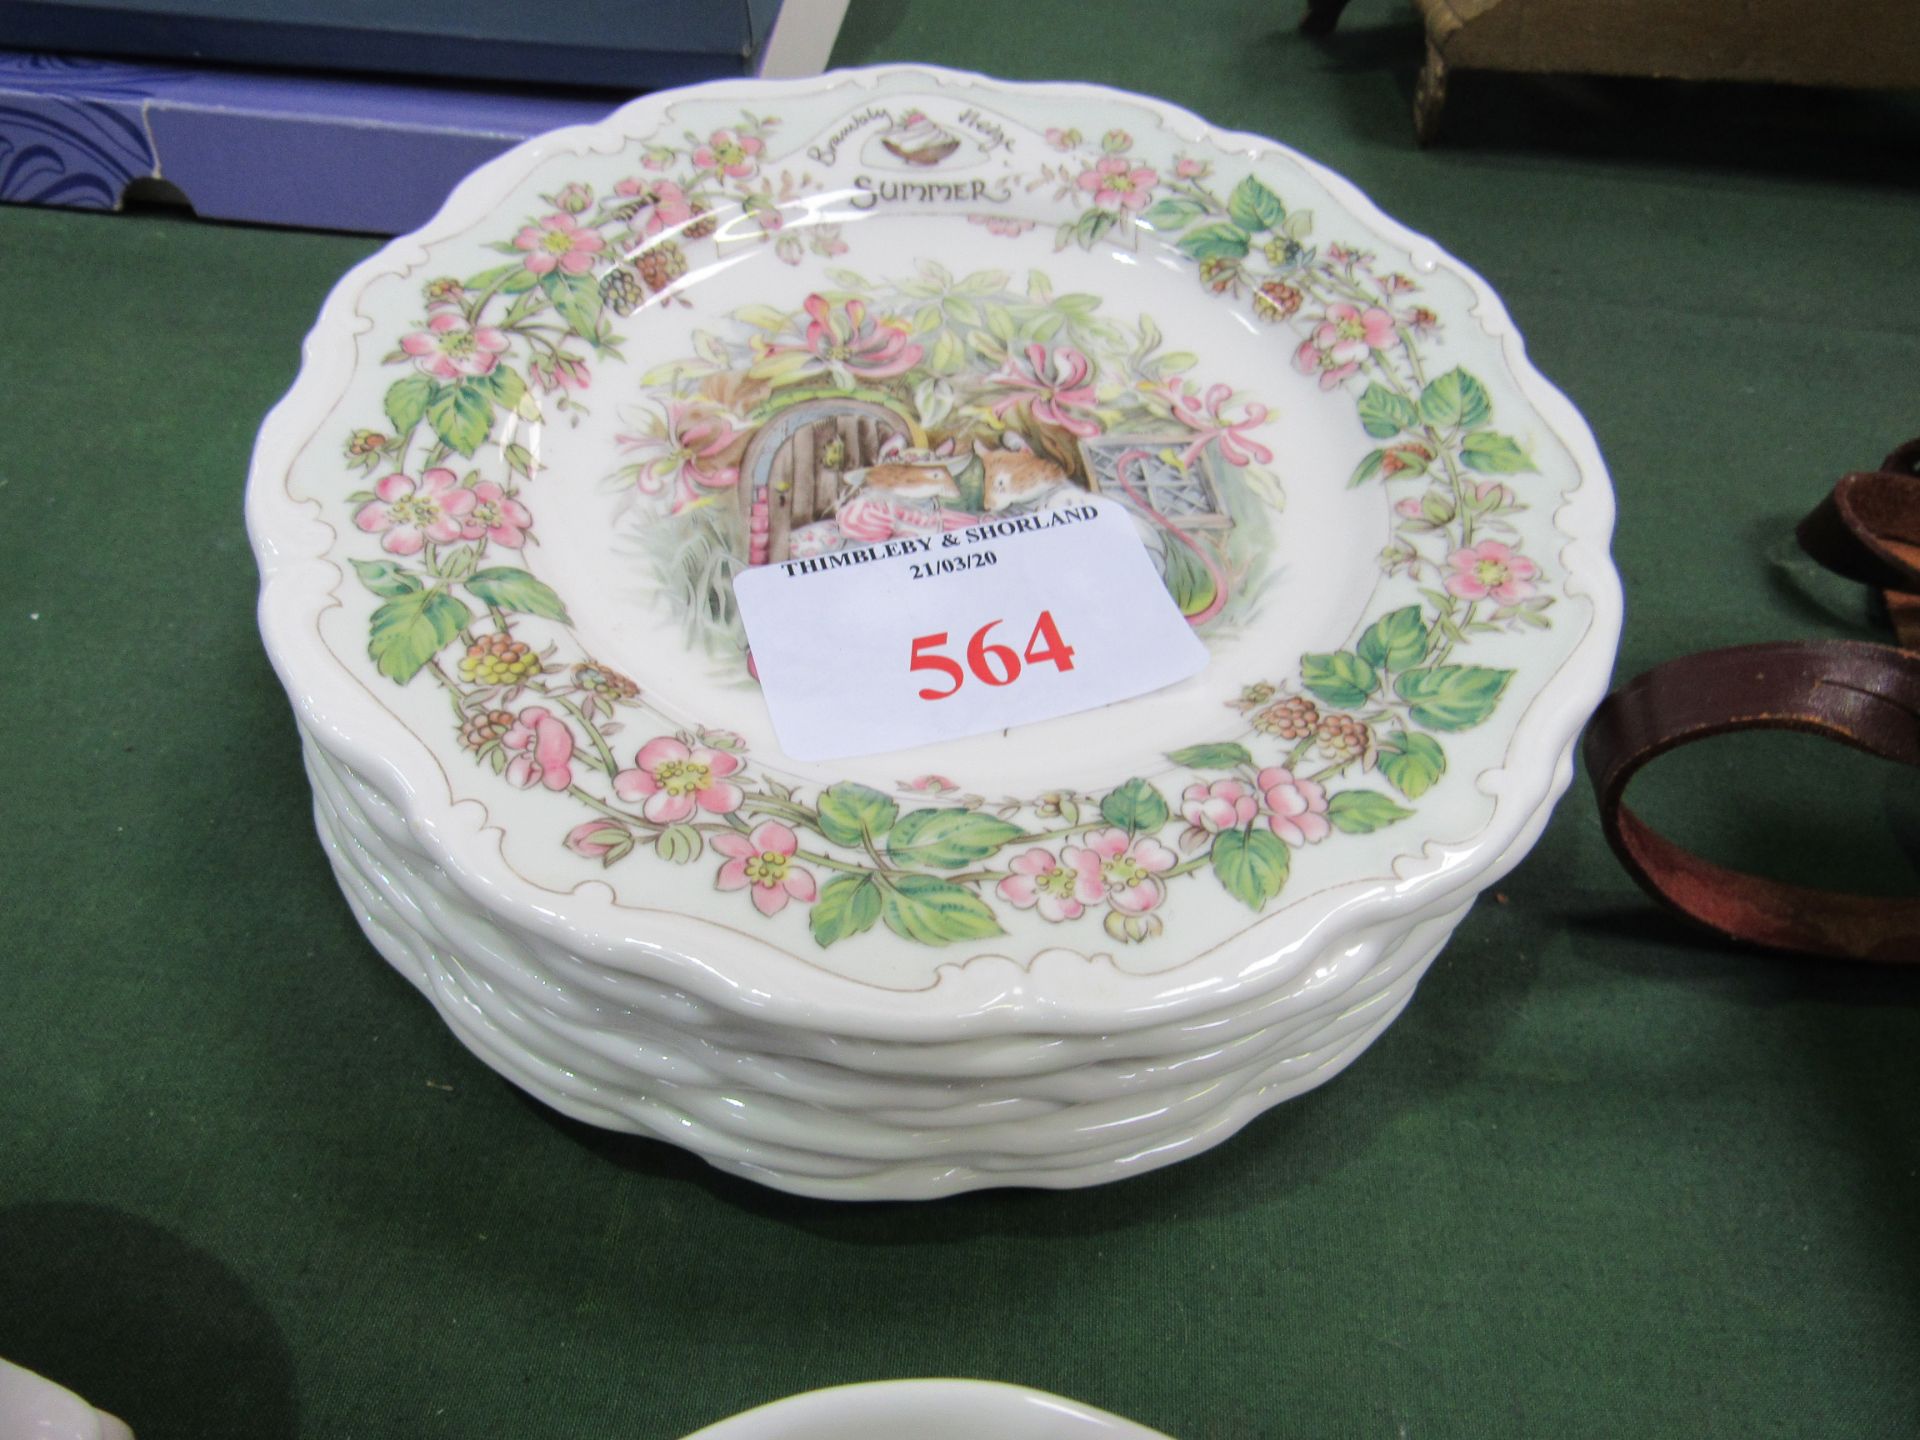 Royal Doulton Merry Midwinter from the Bramley Hedge gift collection, 8 tea plates, 3 saucers and - Image 2 of 5